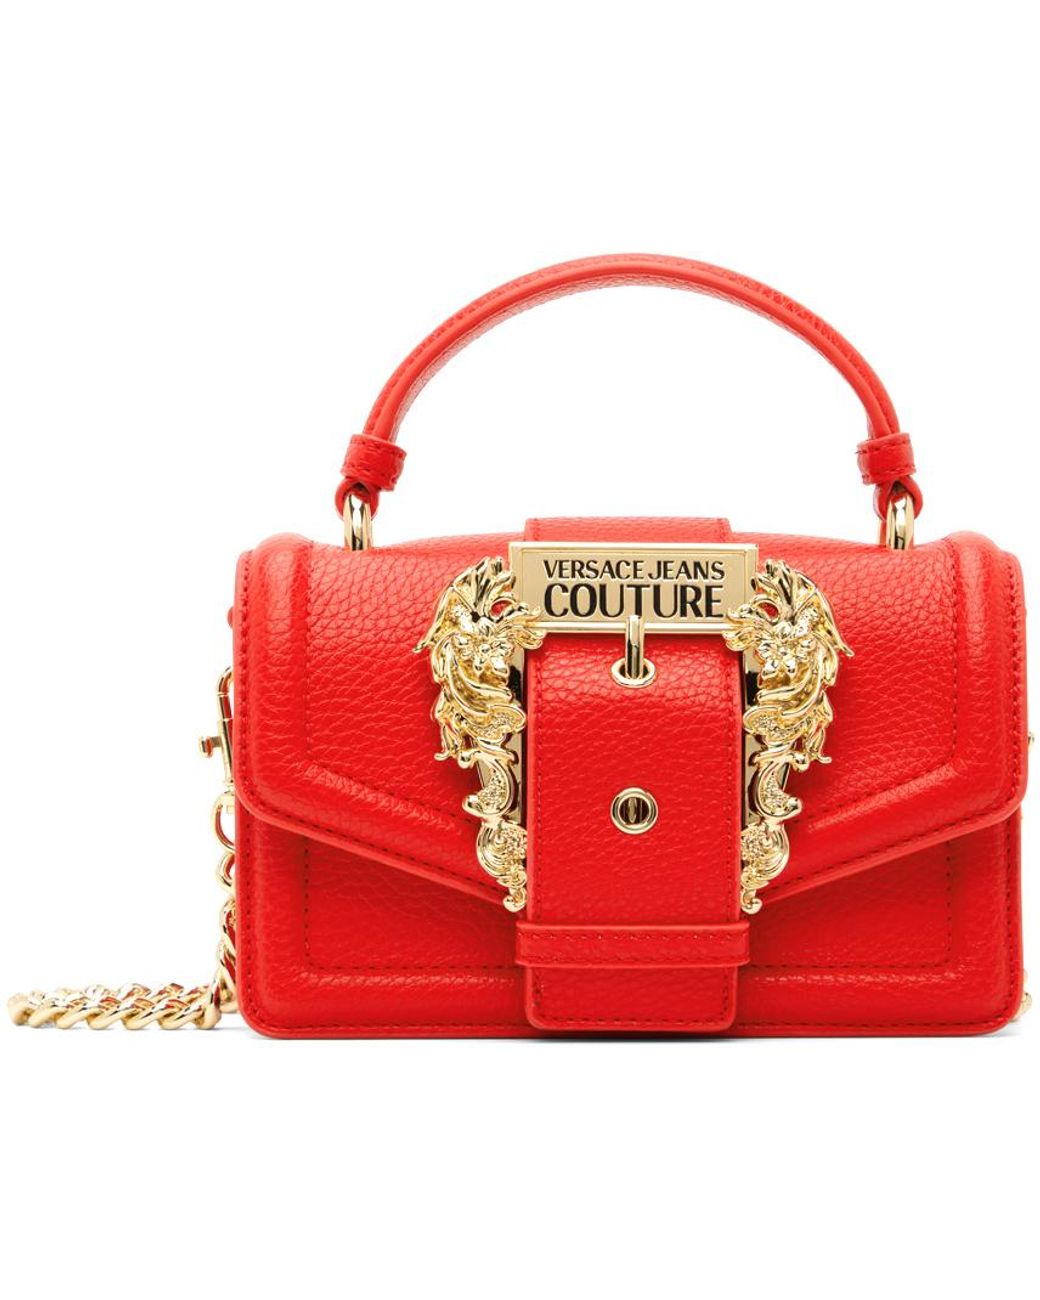 Versace Jeans Couture Red Curb Chain Bag | Lyst Australia